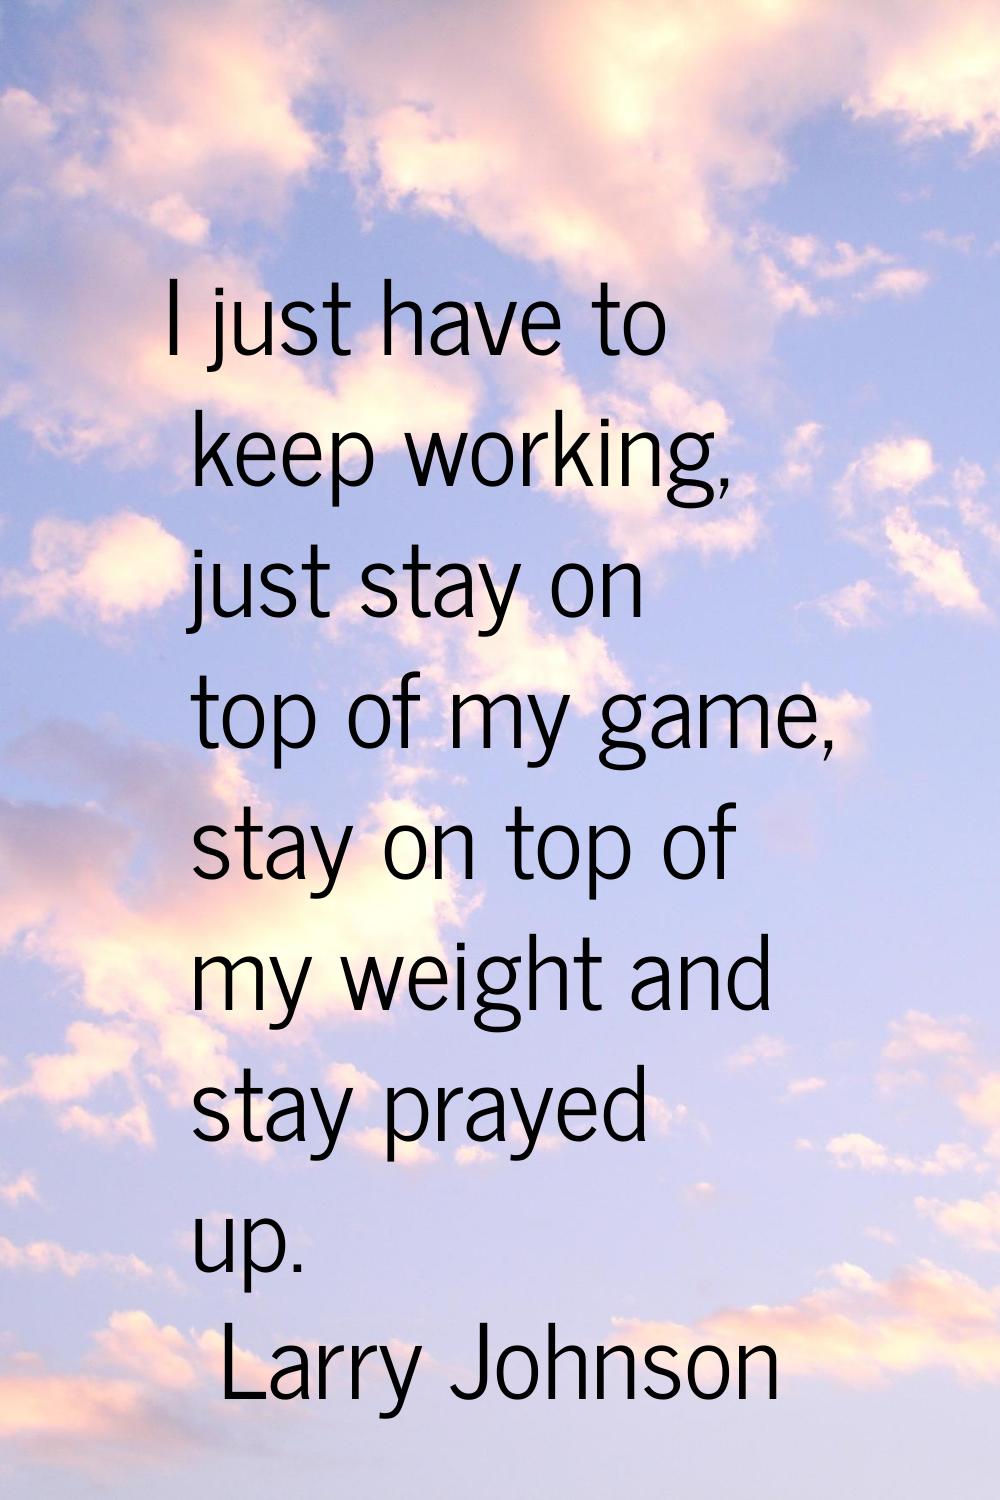 I just have to keep working, just stay on top of my game, stay on top of my weight and stay prayed 